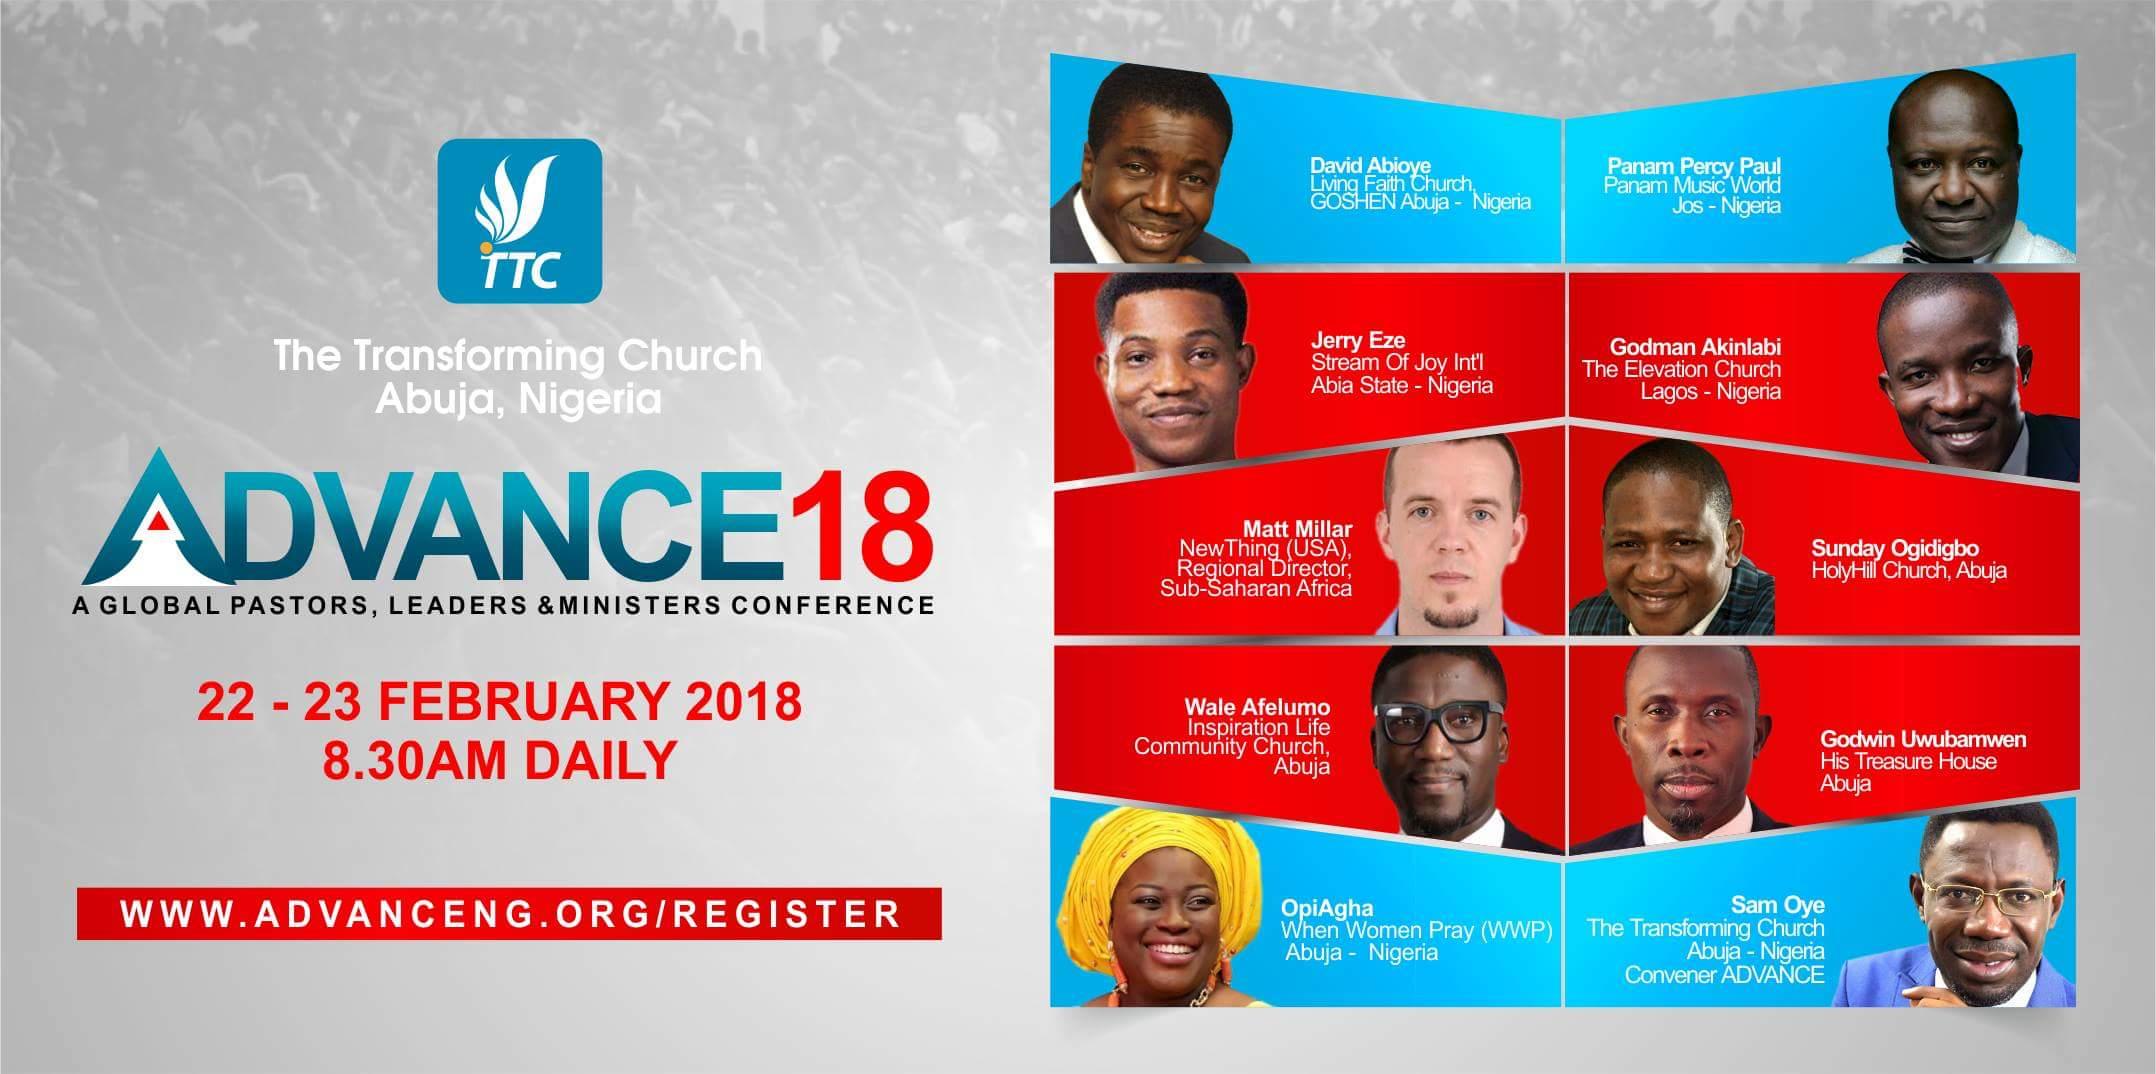 ONLY 100 SEATS AVAILABLE, REGISTER NOW FOR - ADVANCE 2018_A Leadership Capacity Building Conference For Lead Pastors, Associate Pastors, Young Ministers, Women In Ministry, Campus Leaders, NCCF Leaders, Team Leaders & Church Workers!